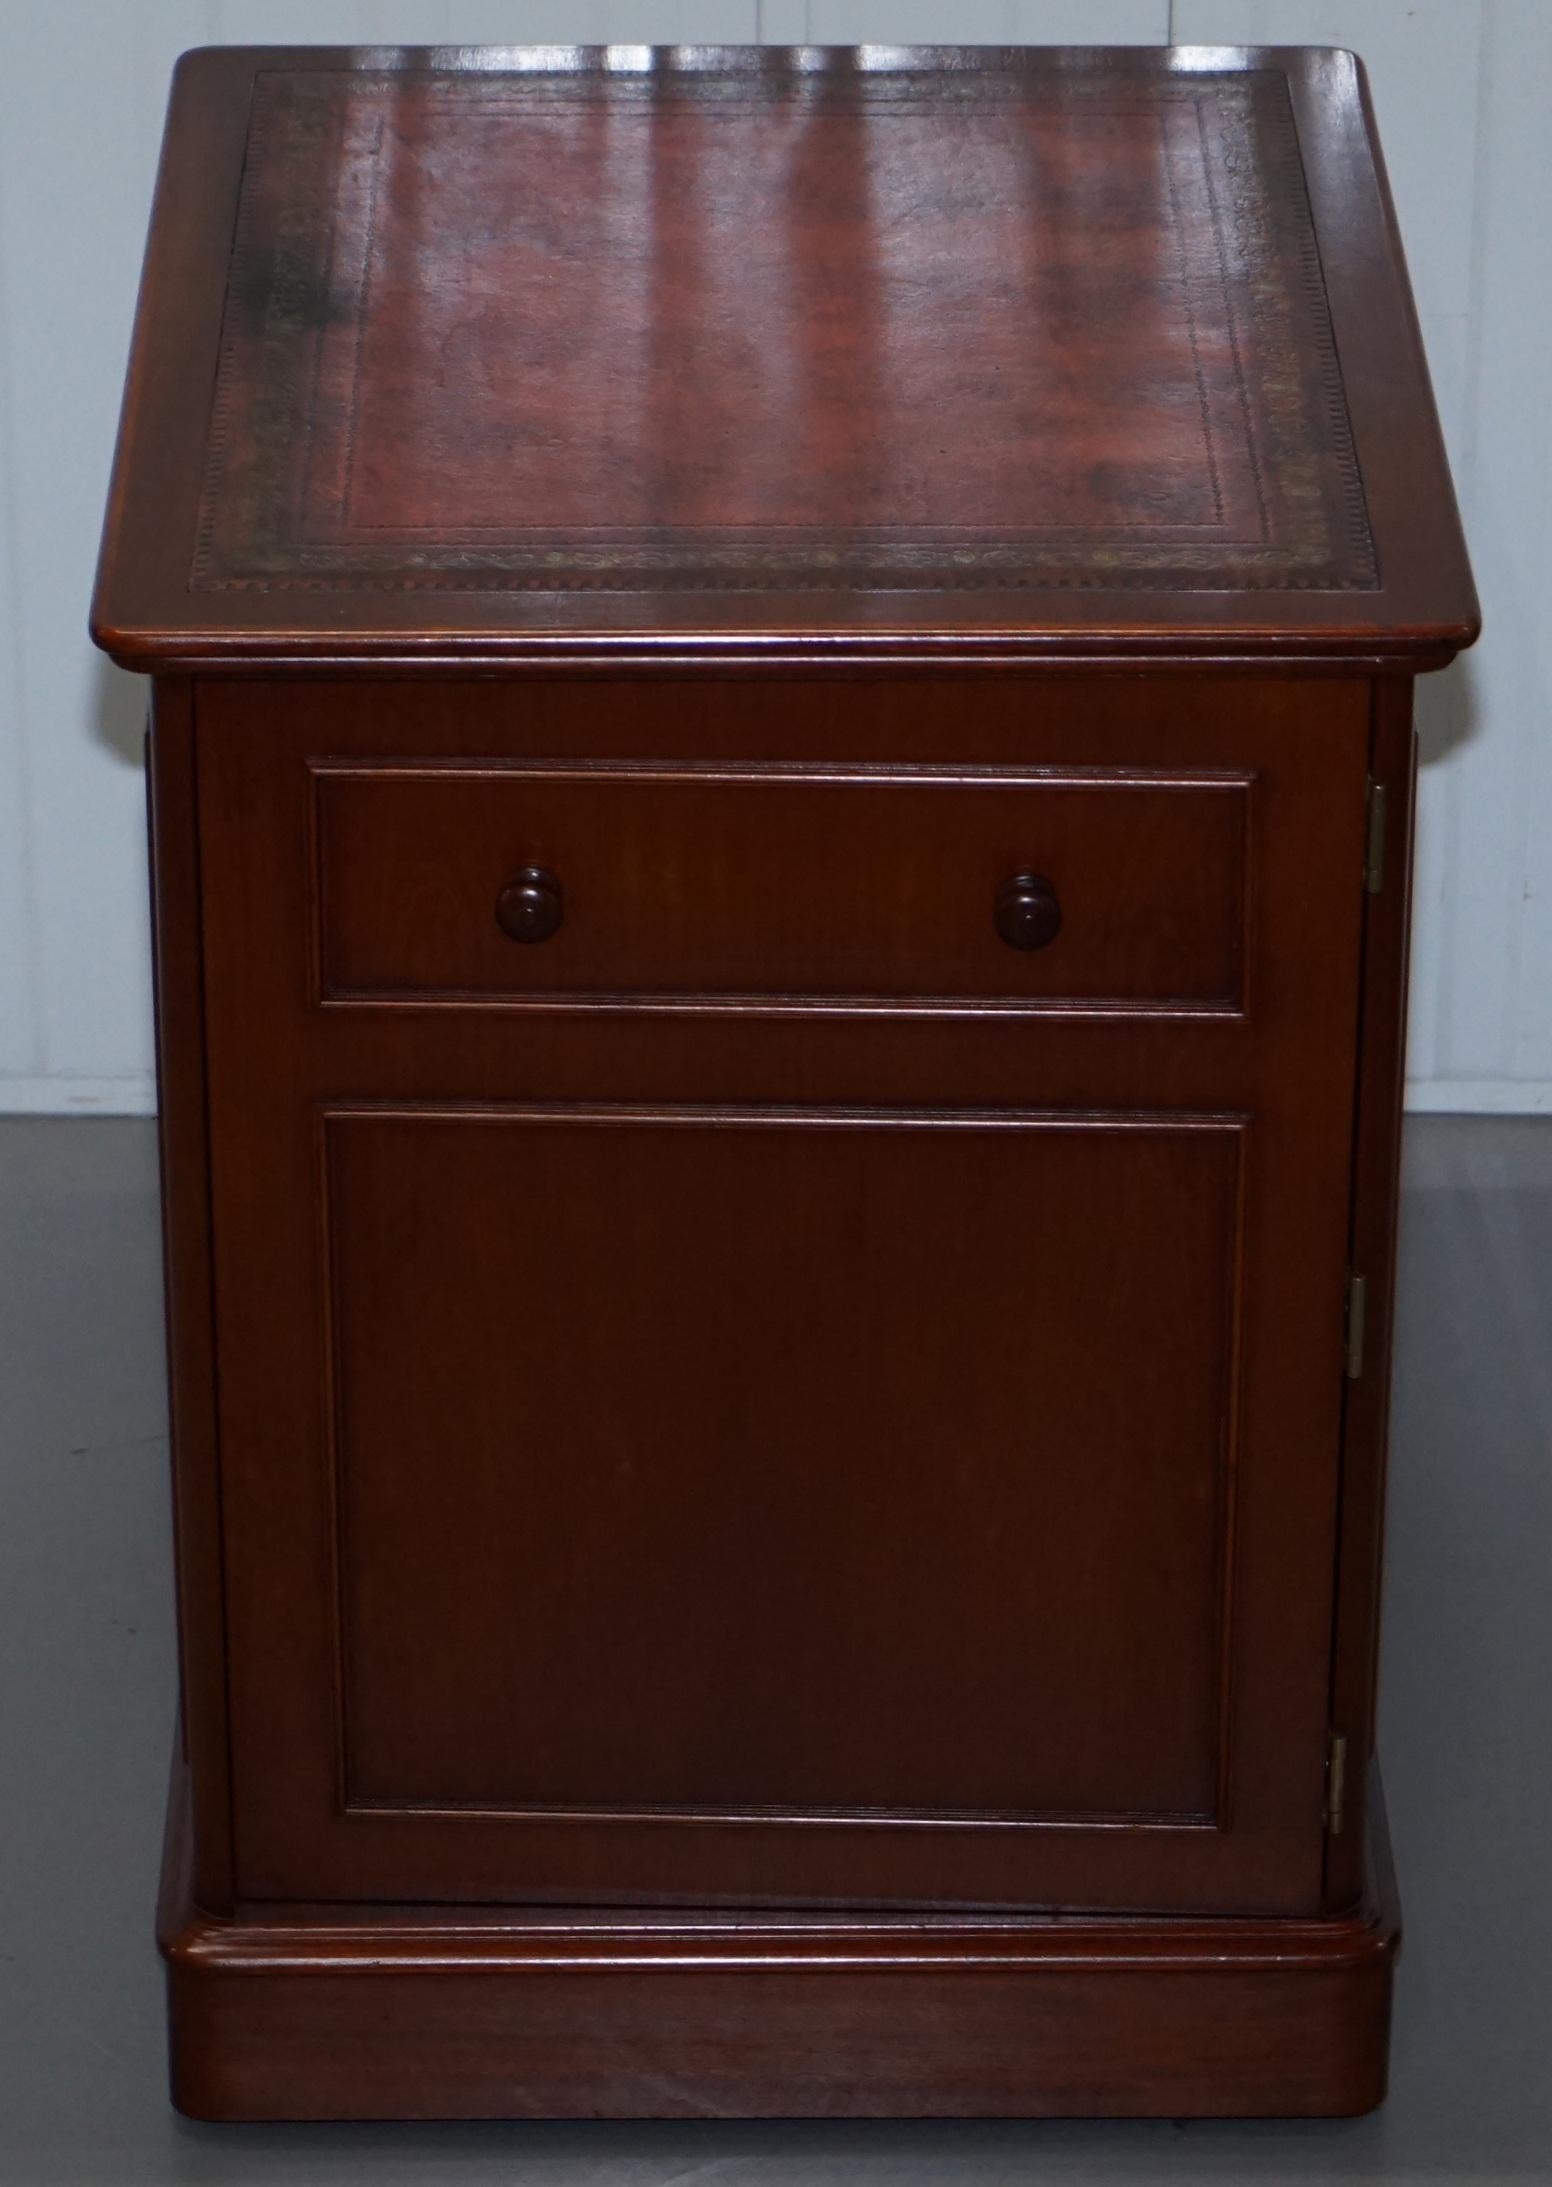 We are delighted to offer for sale this lovely solid cherrywood office cupboard with sliding printer shelf and oxblood leather top

This piece is part of a suite, the entire collection includes a twin pedestal partner desk, a pair of tall thing